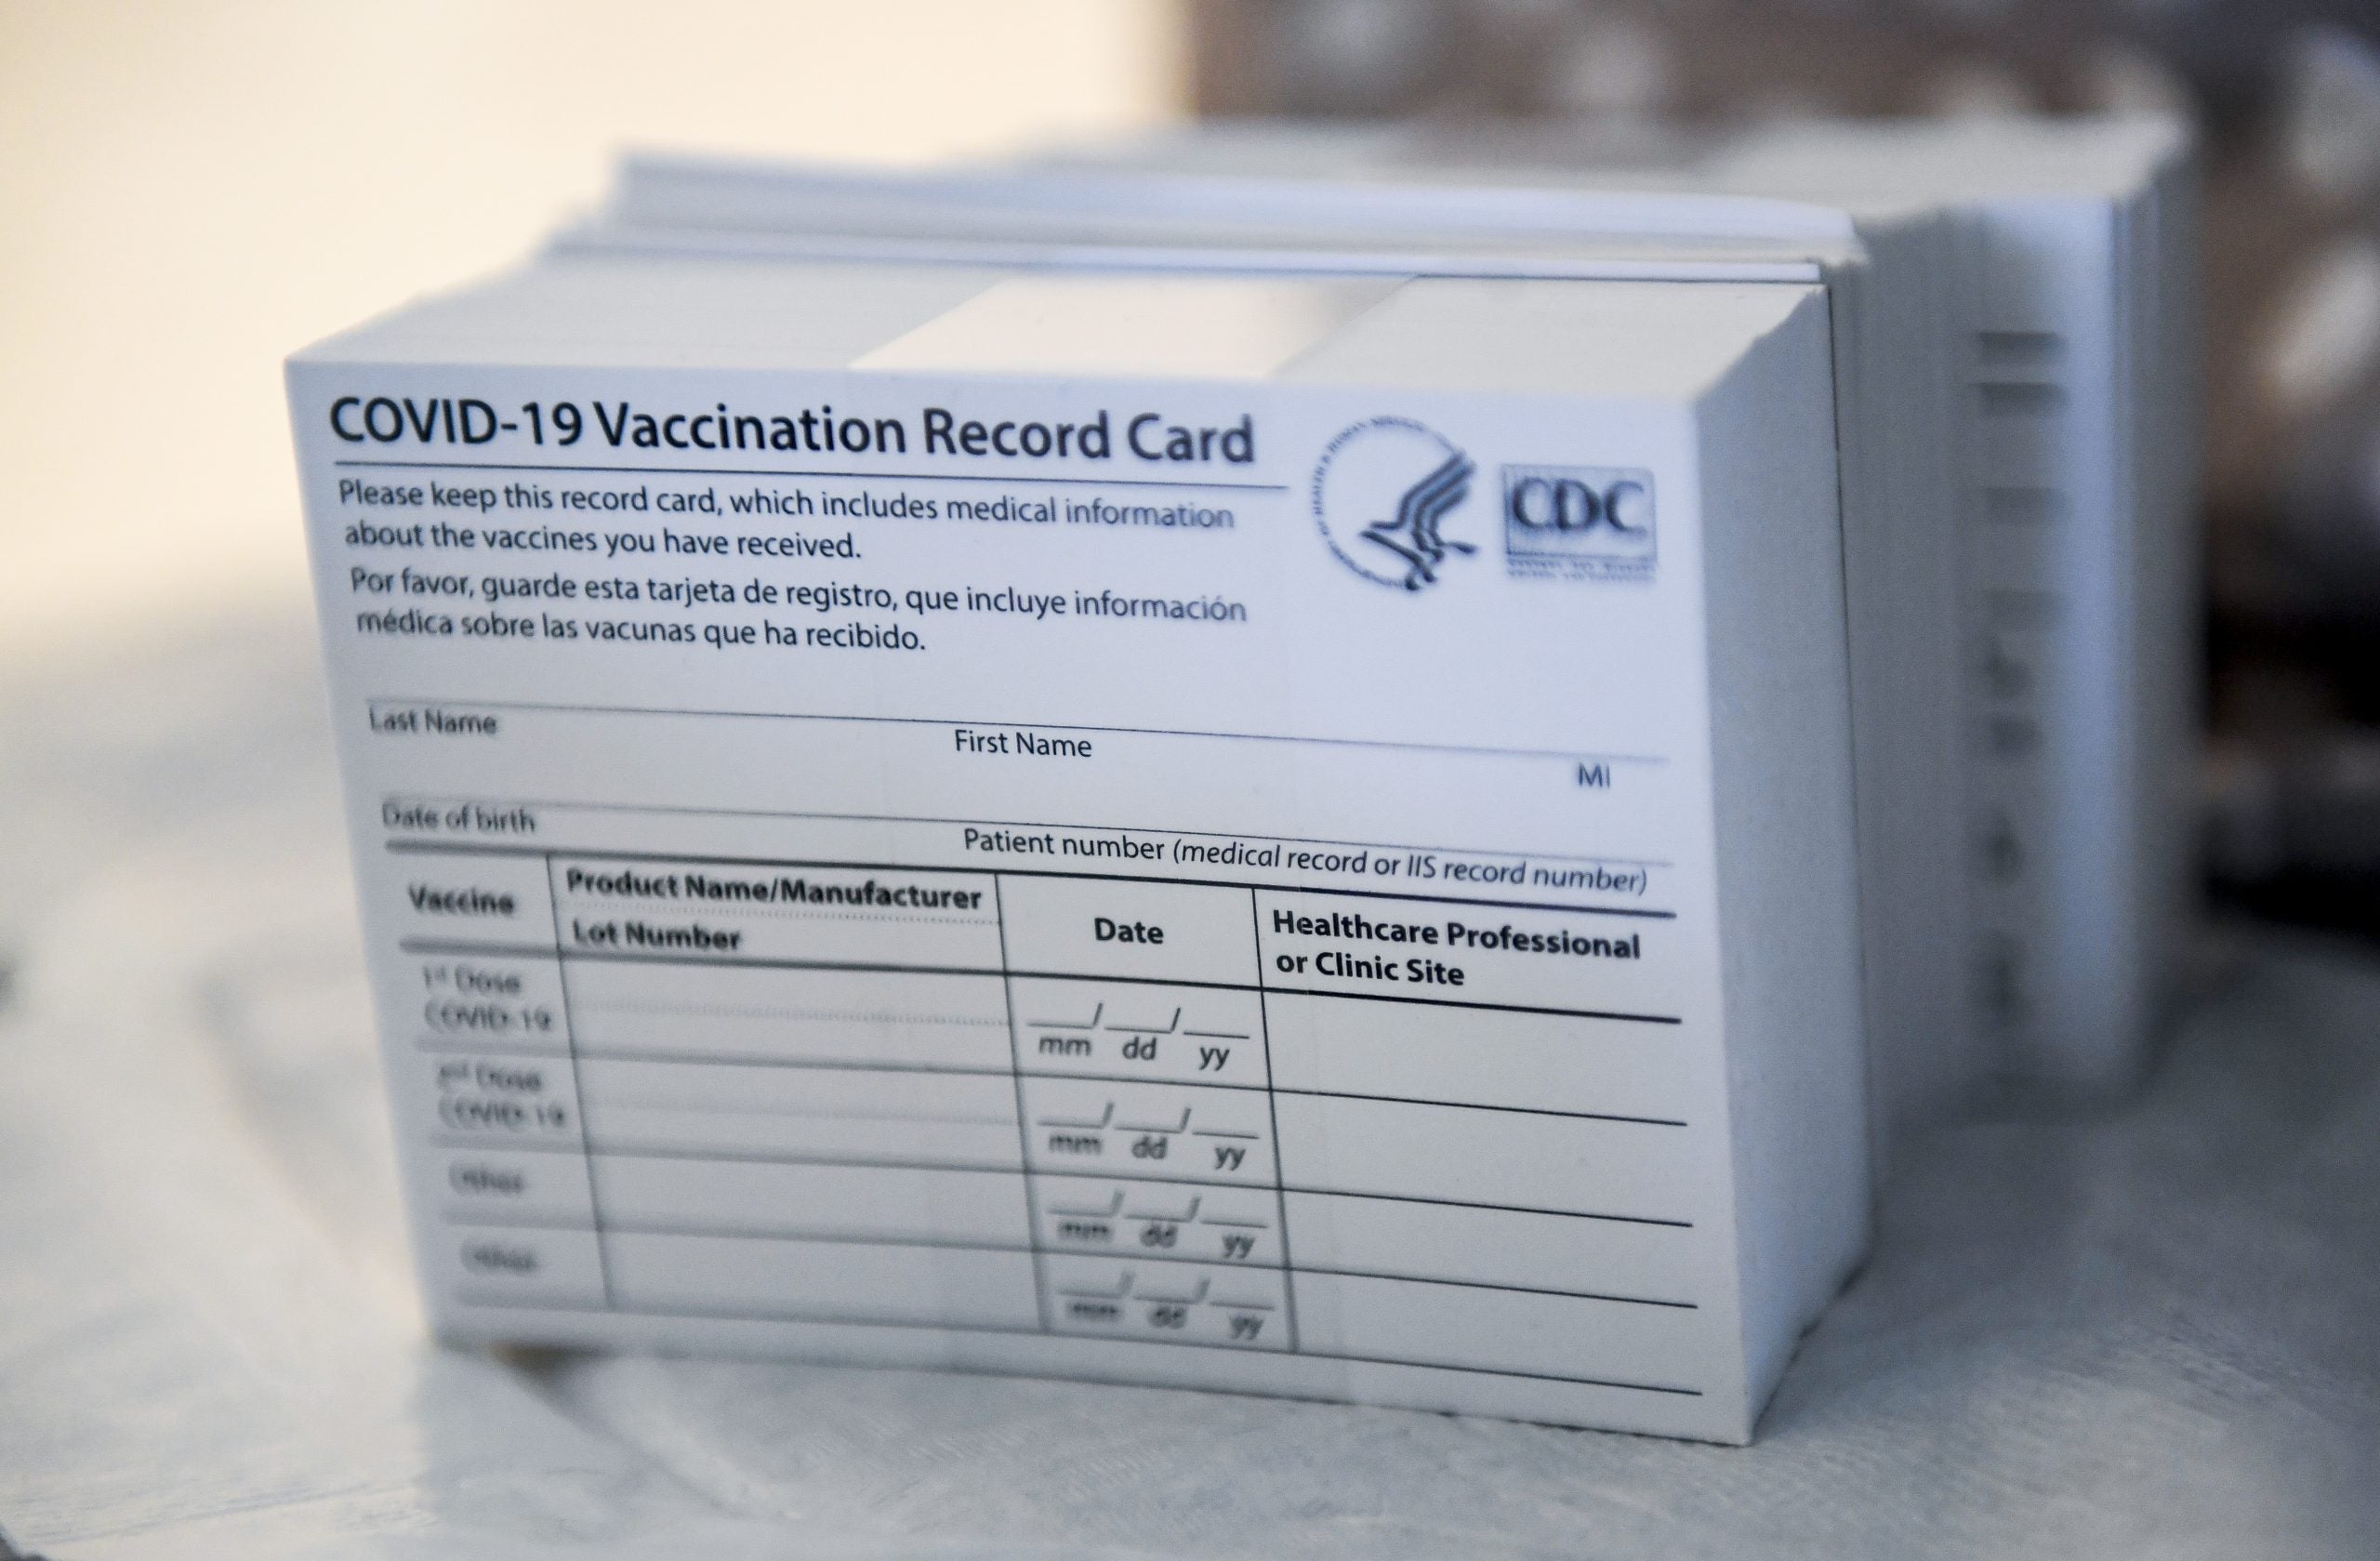 Woman Arrested After Fake Vaccination Card Said She Received the 'Maderna' Vaccine